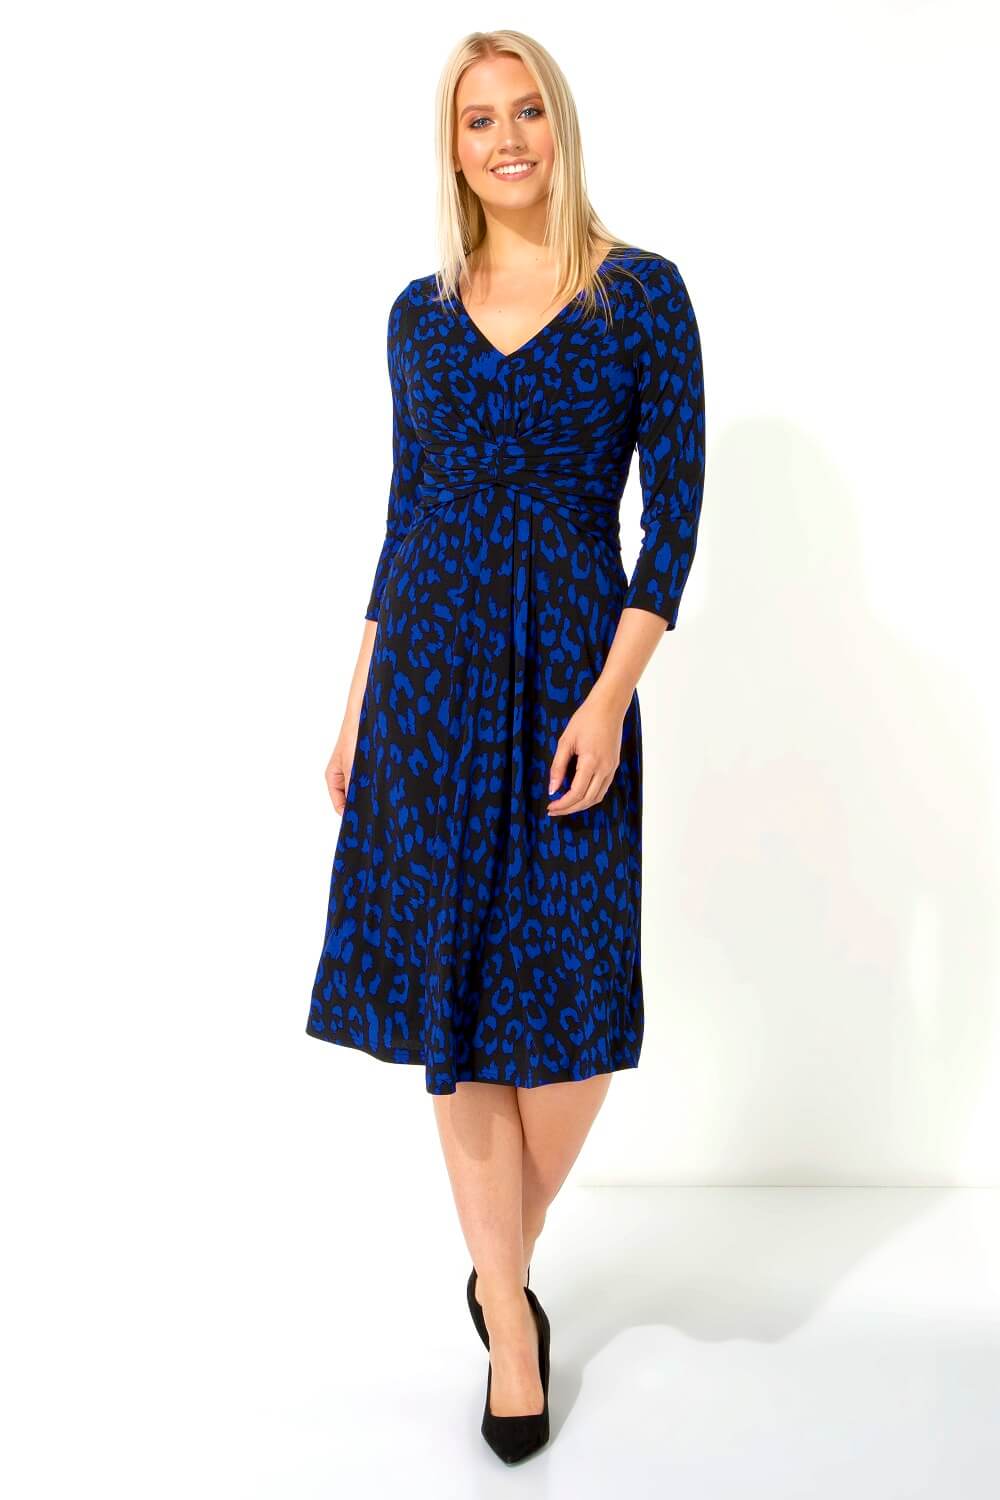 Royal Blue Animal Print Fit And Flare Dress, Image 2 of 5